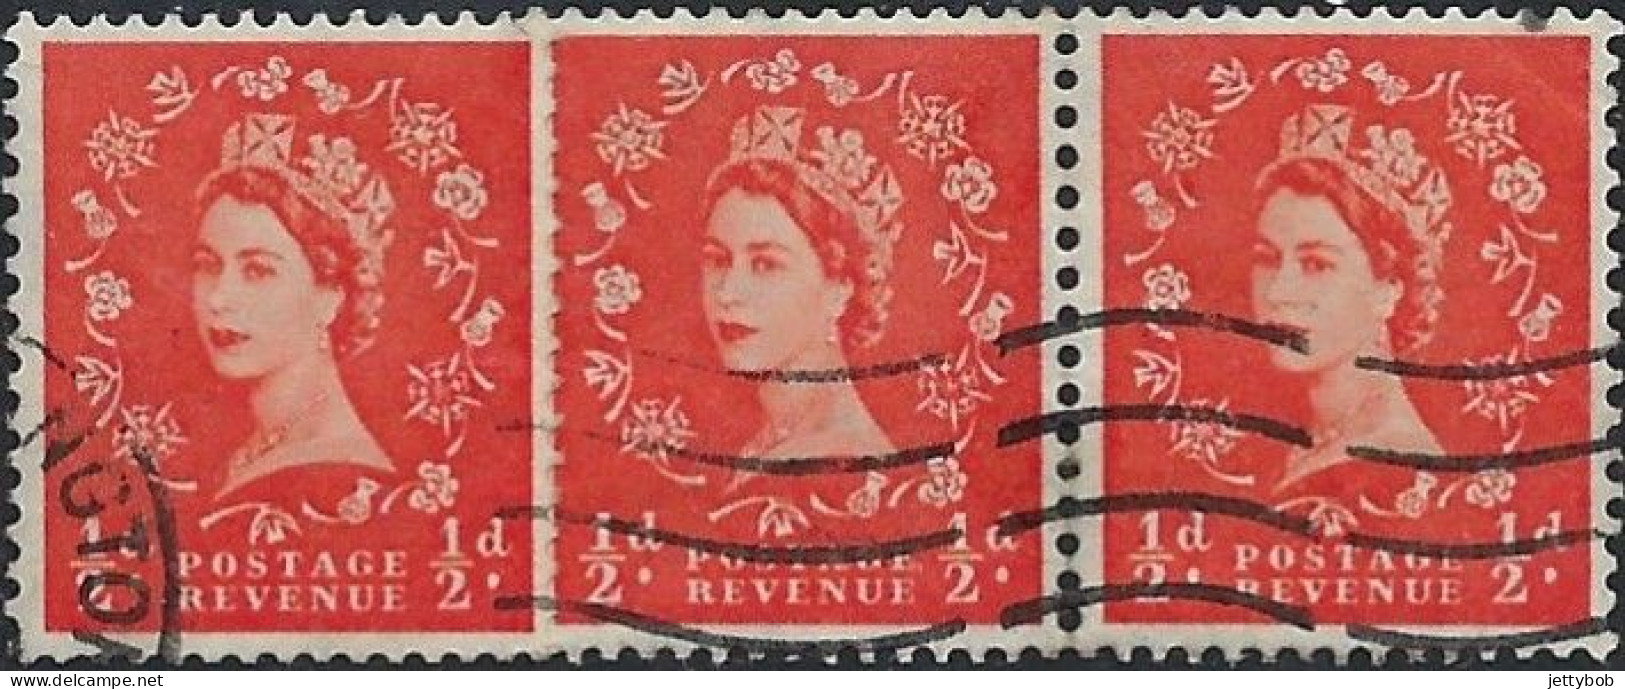 GB 1954 QEII Wilding 0.5d Wnk: Tudor Crown Inverted Horizontal Pr + Single From Booklets Used - Oblitérés